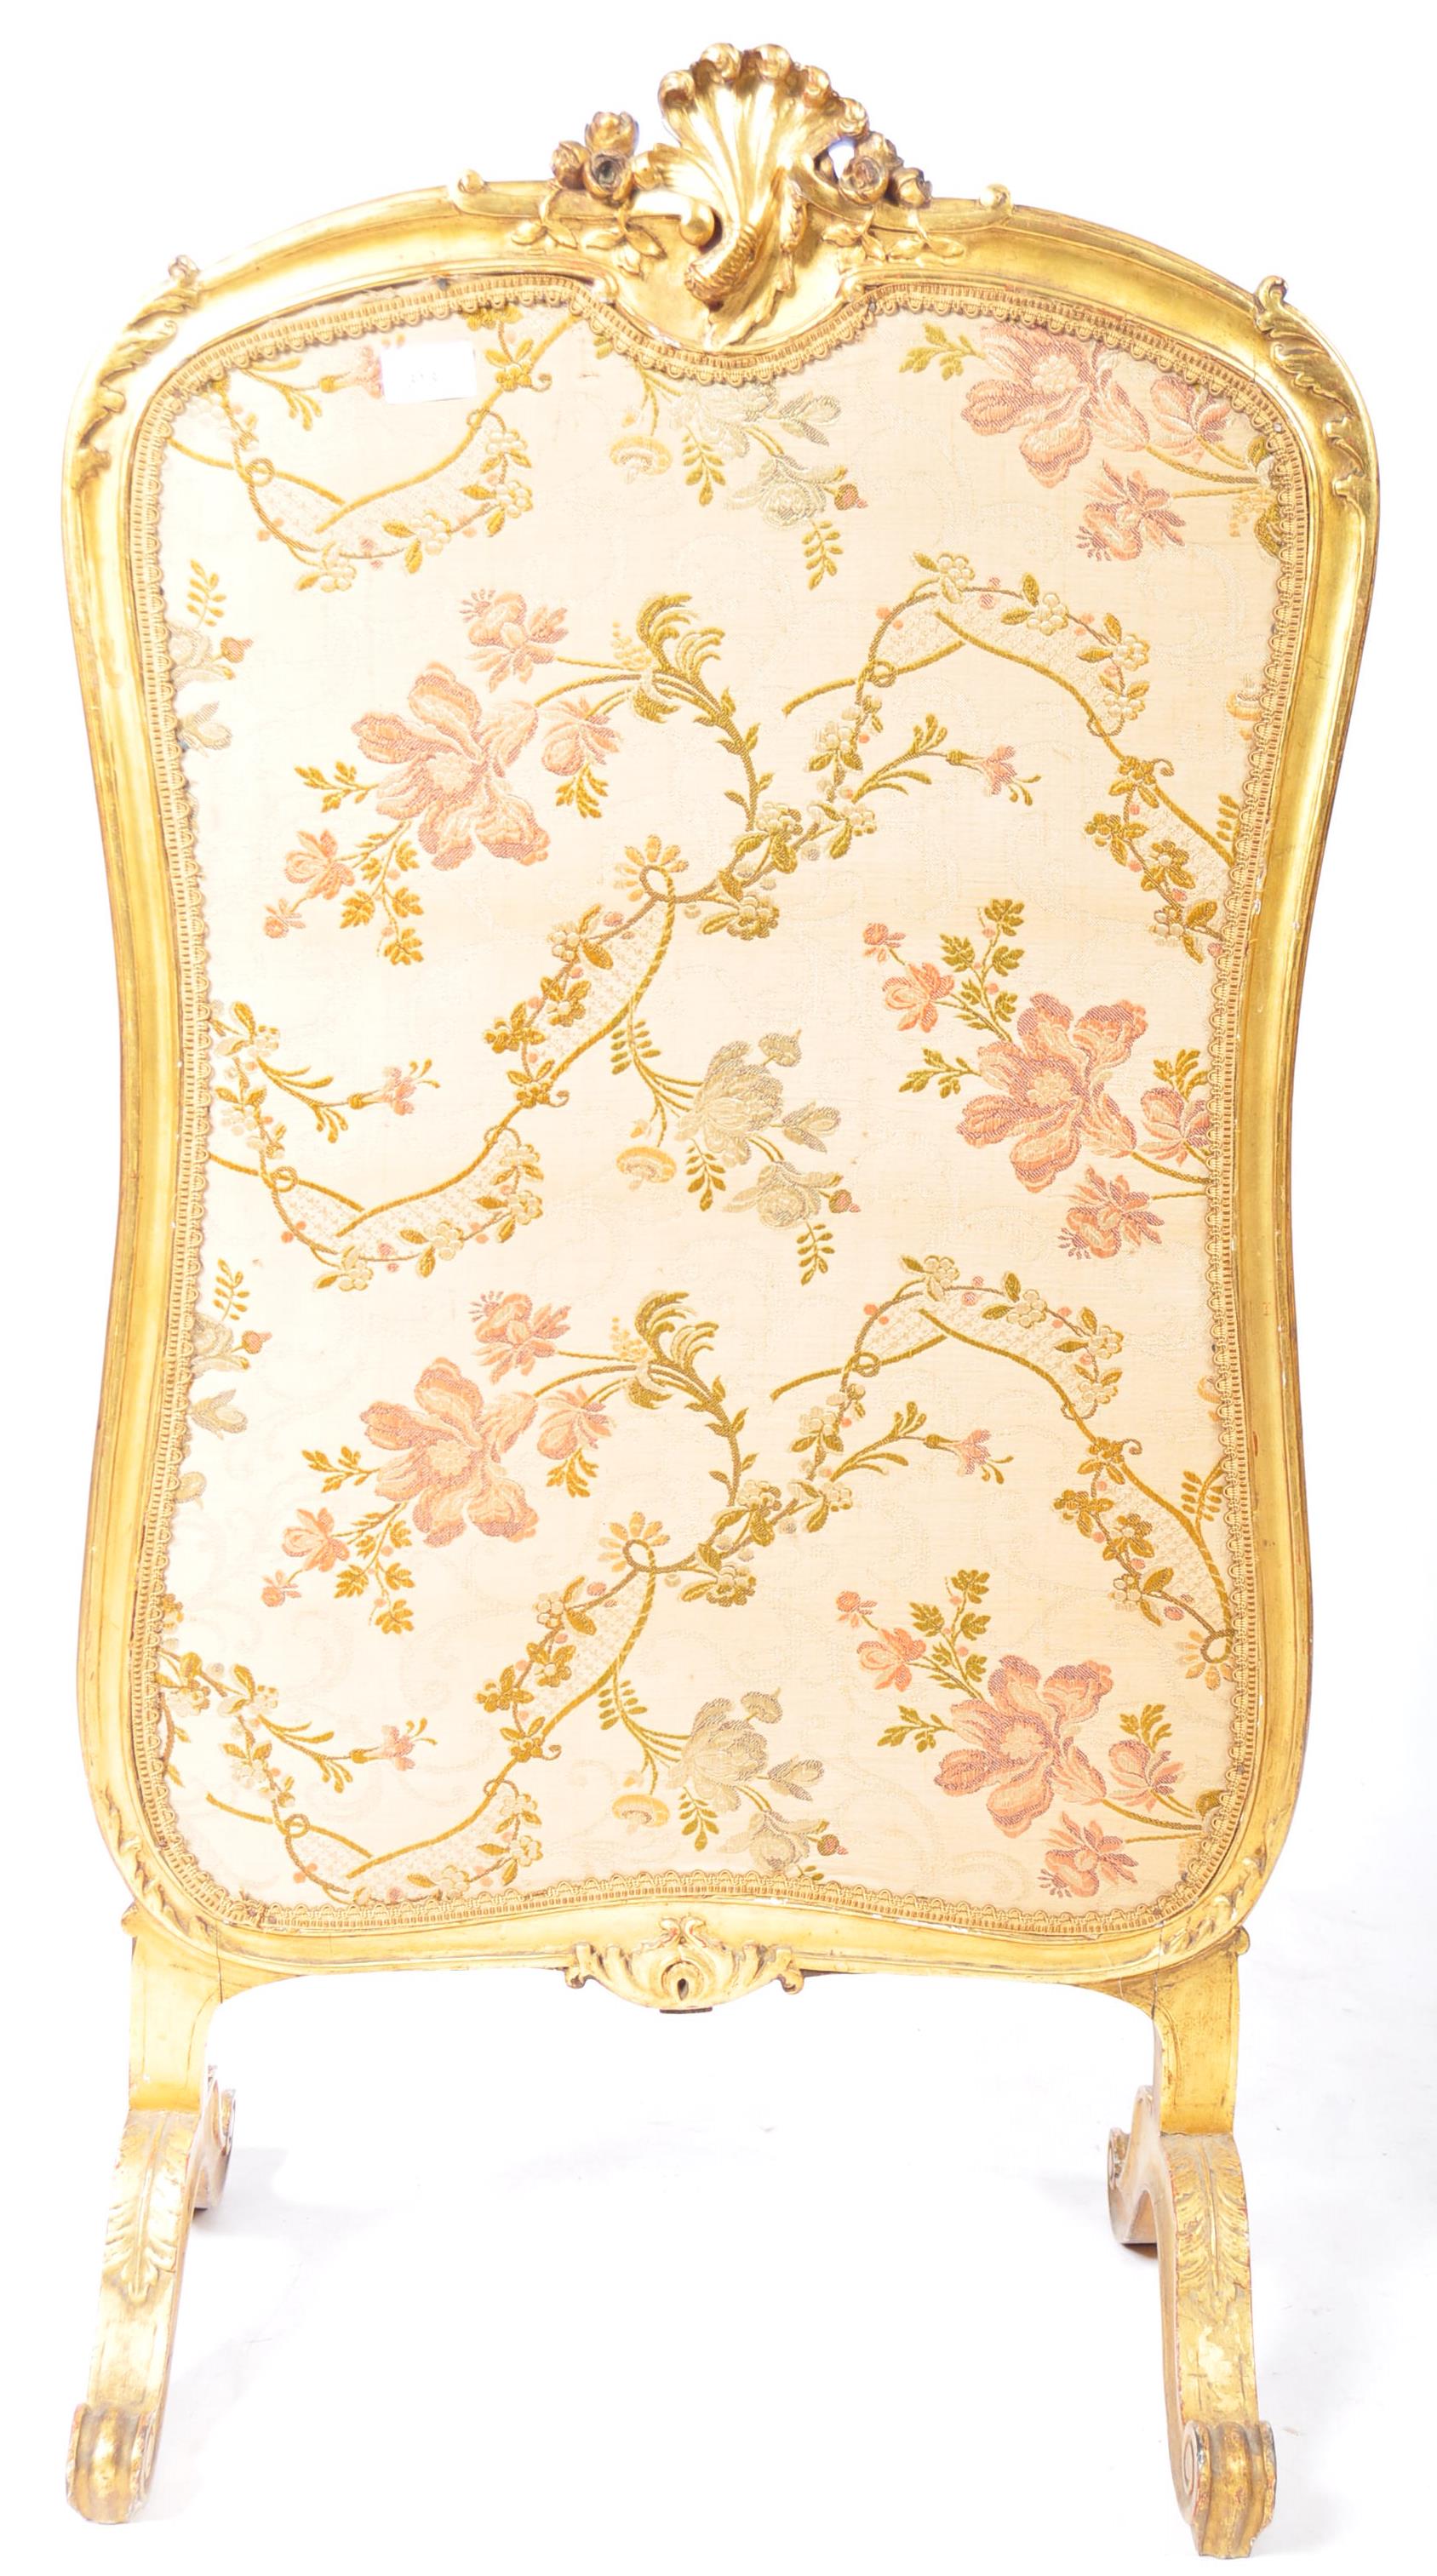 19TH ENGLISH ROCOCO INFLUENCE FIRE SCREEN - Image 3 of 5